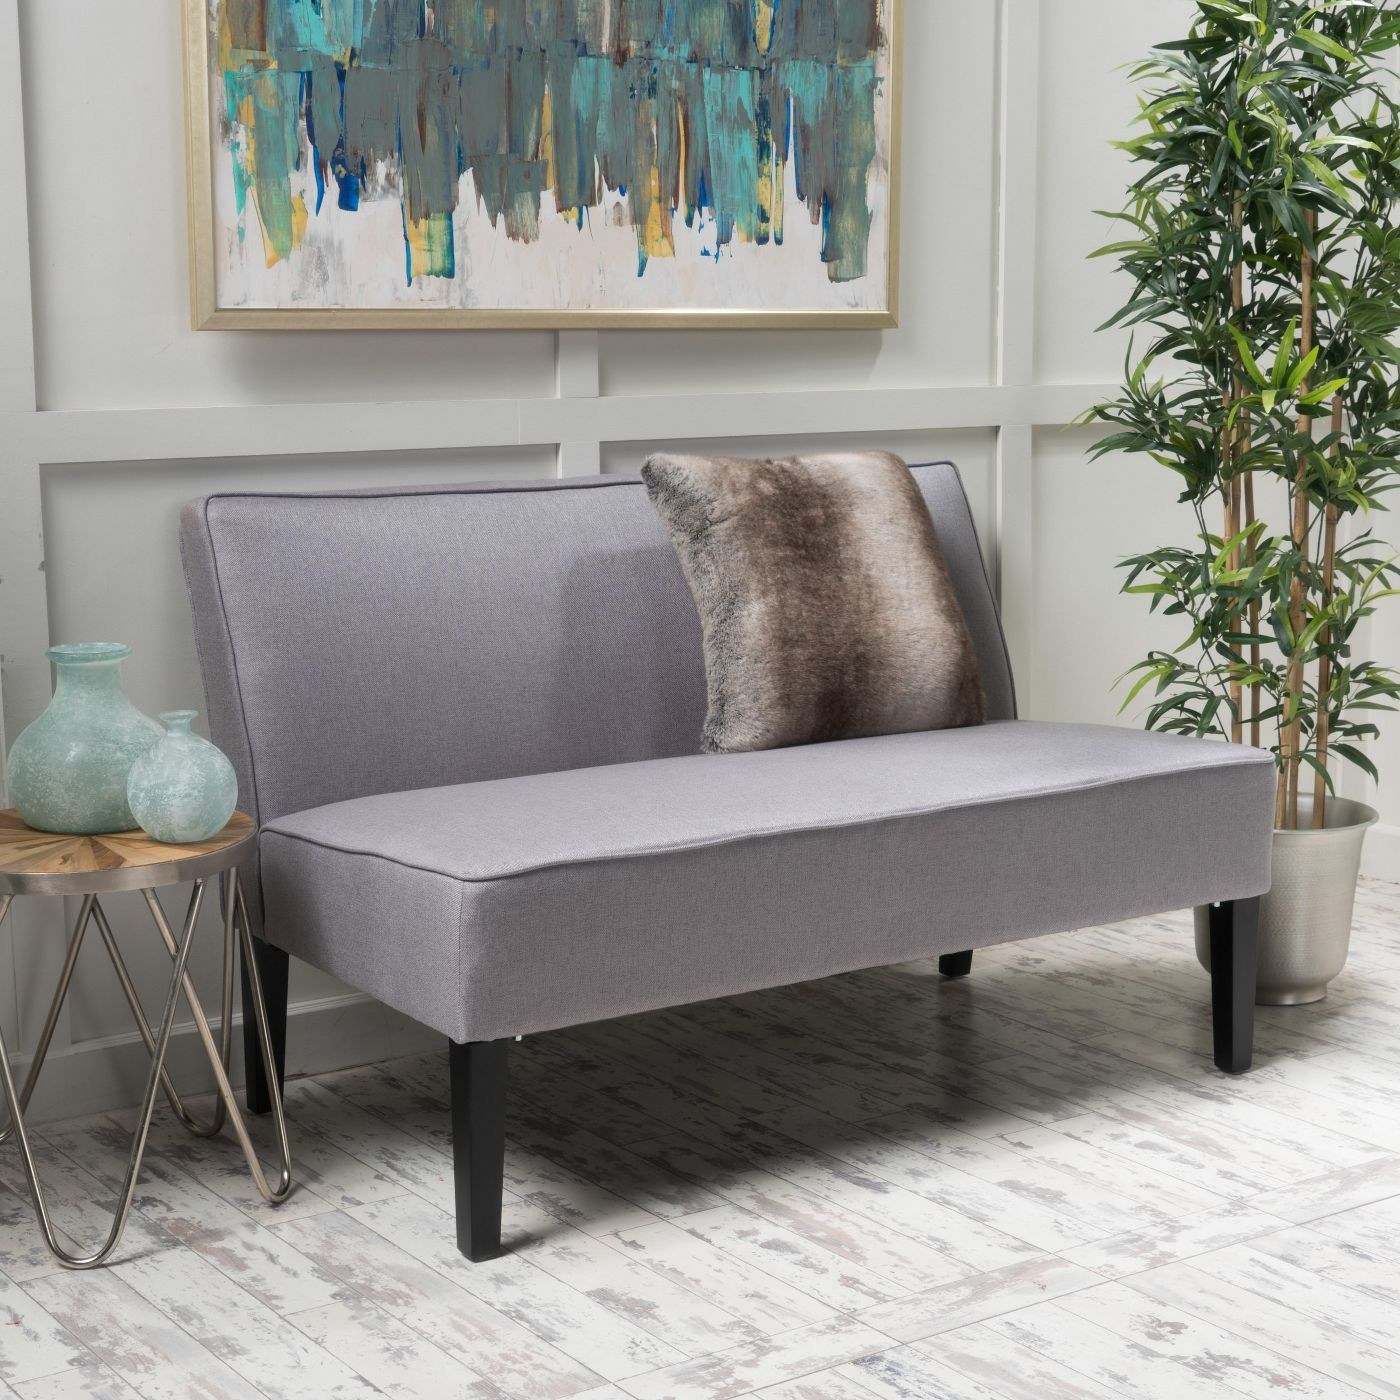 the grey bench in a decorated living room